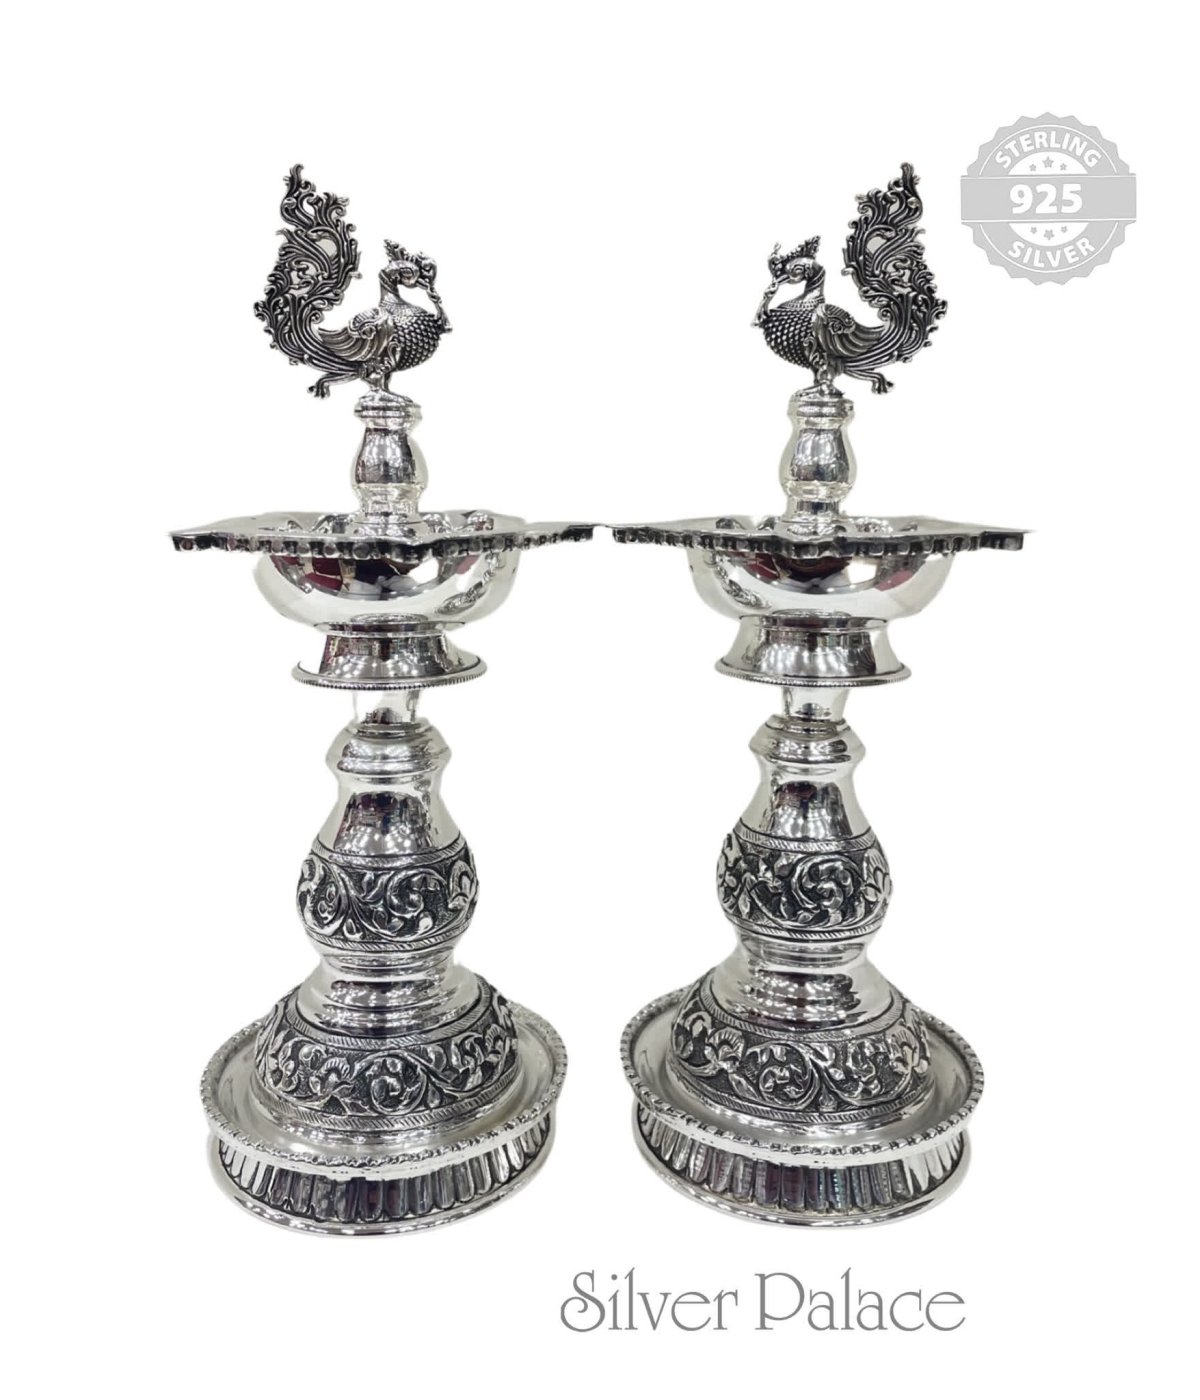 OXISIDISED SILVER LAMP WITH CASTING ANAM 92.5 SILVER